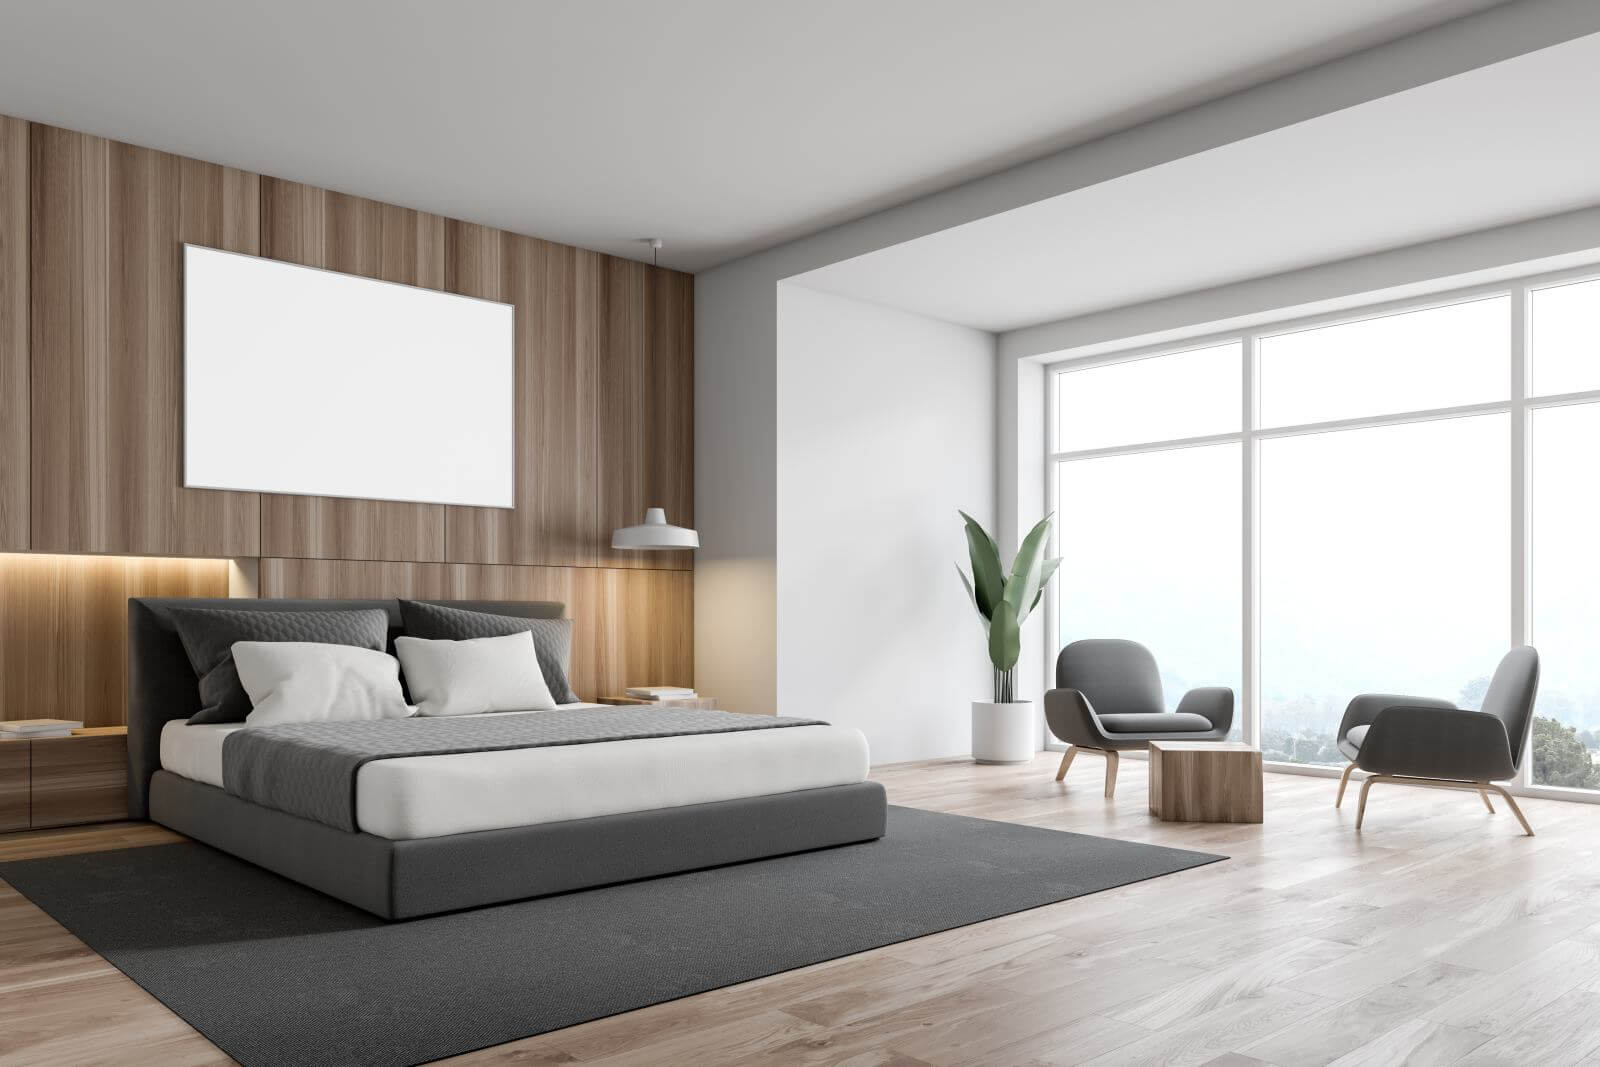 Corner of stylish bedroom with white and wooden walls, wooden floor, gray carpet, master bed and horizontal mock up poster. Armchairs near coffee table. 3d rendering